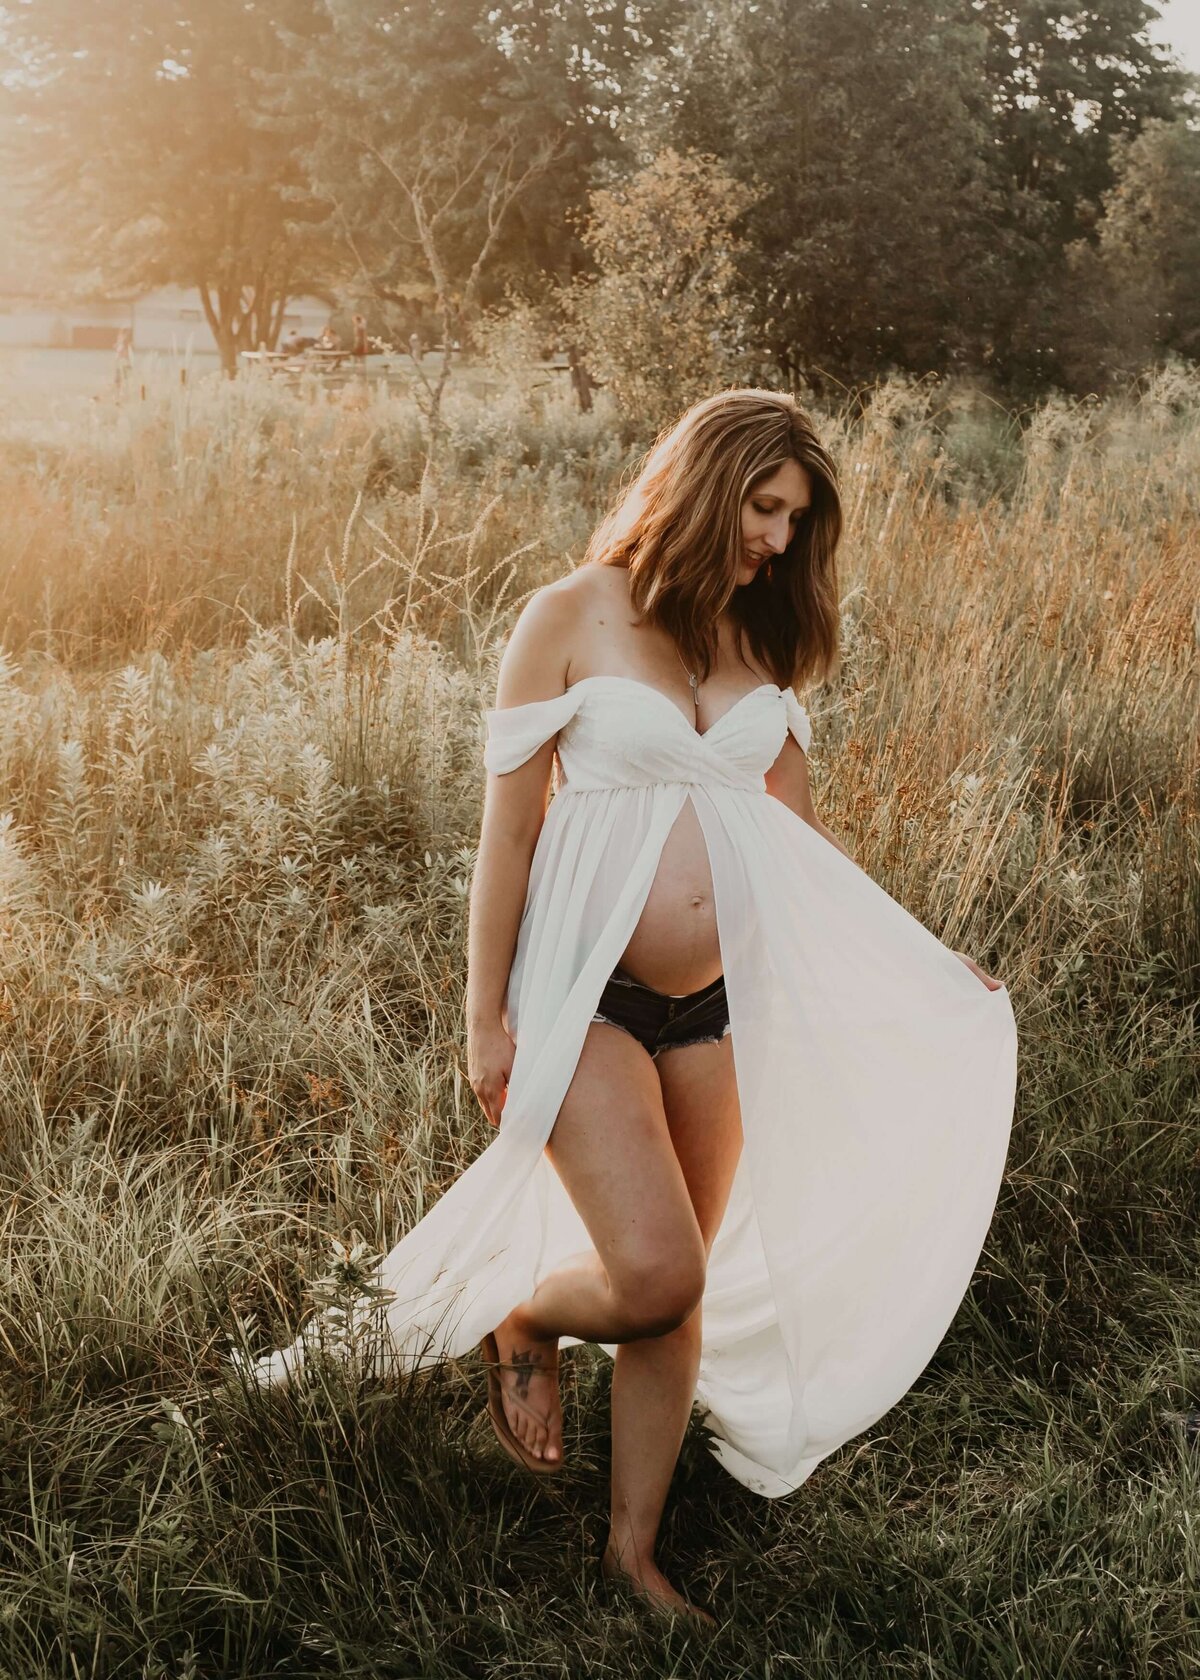 A pregnant woman in a white dress standing in a field captured by a Pittsburgh maternity photographer.